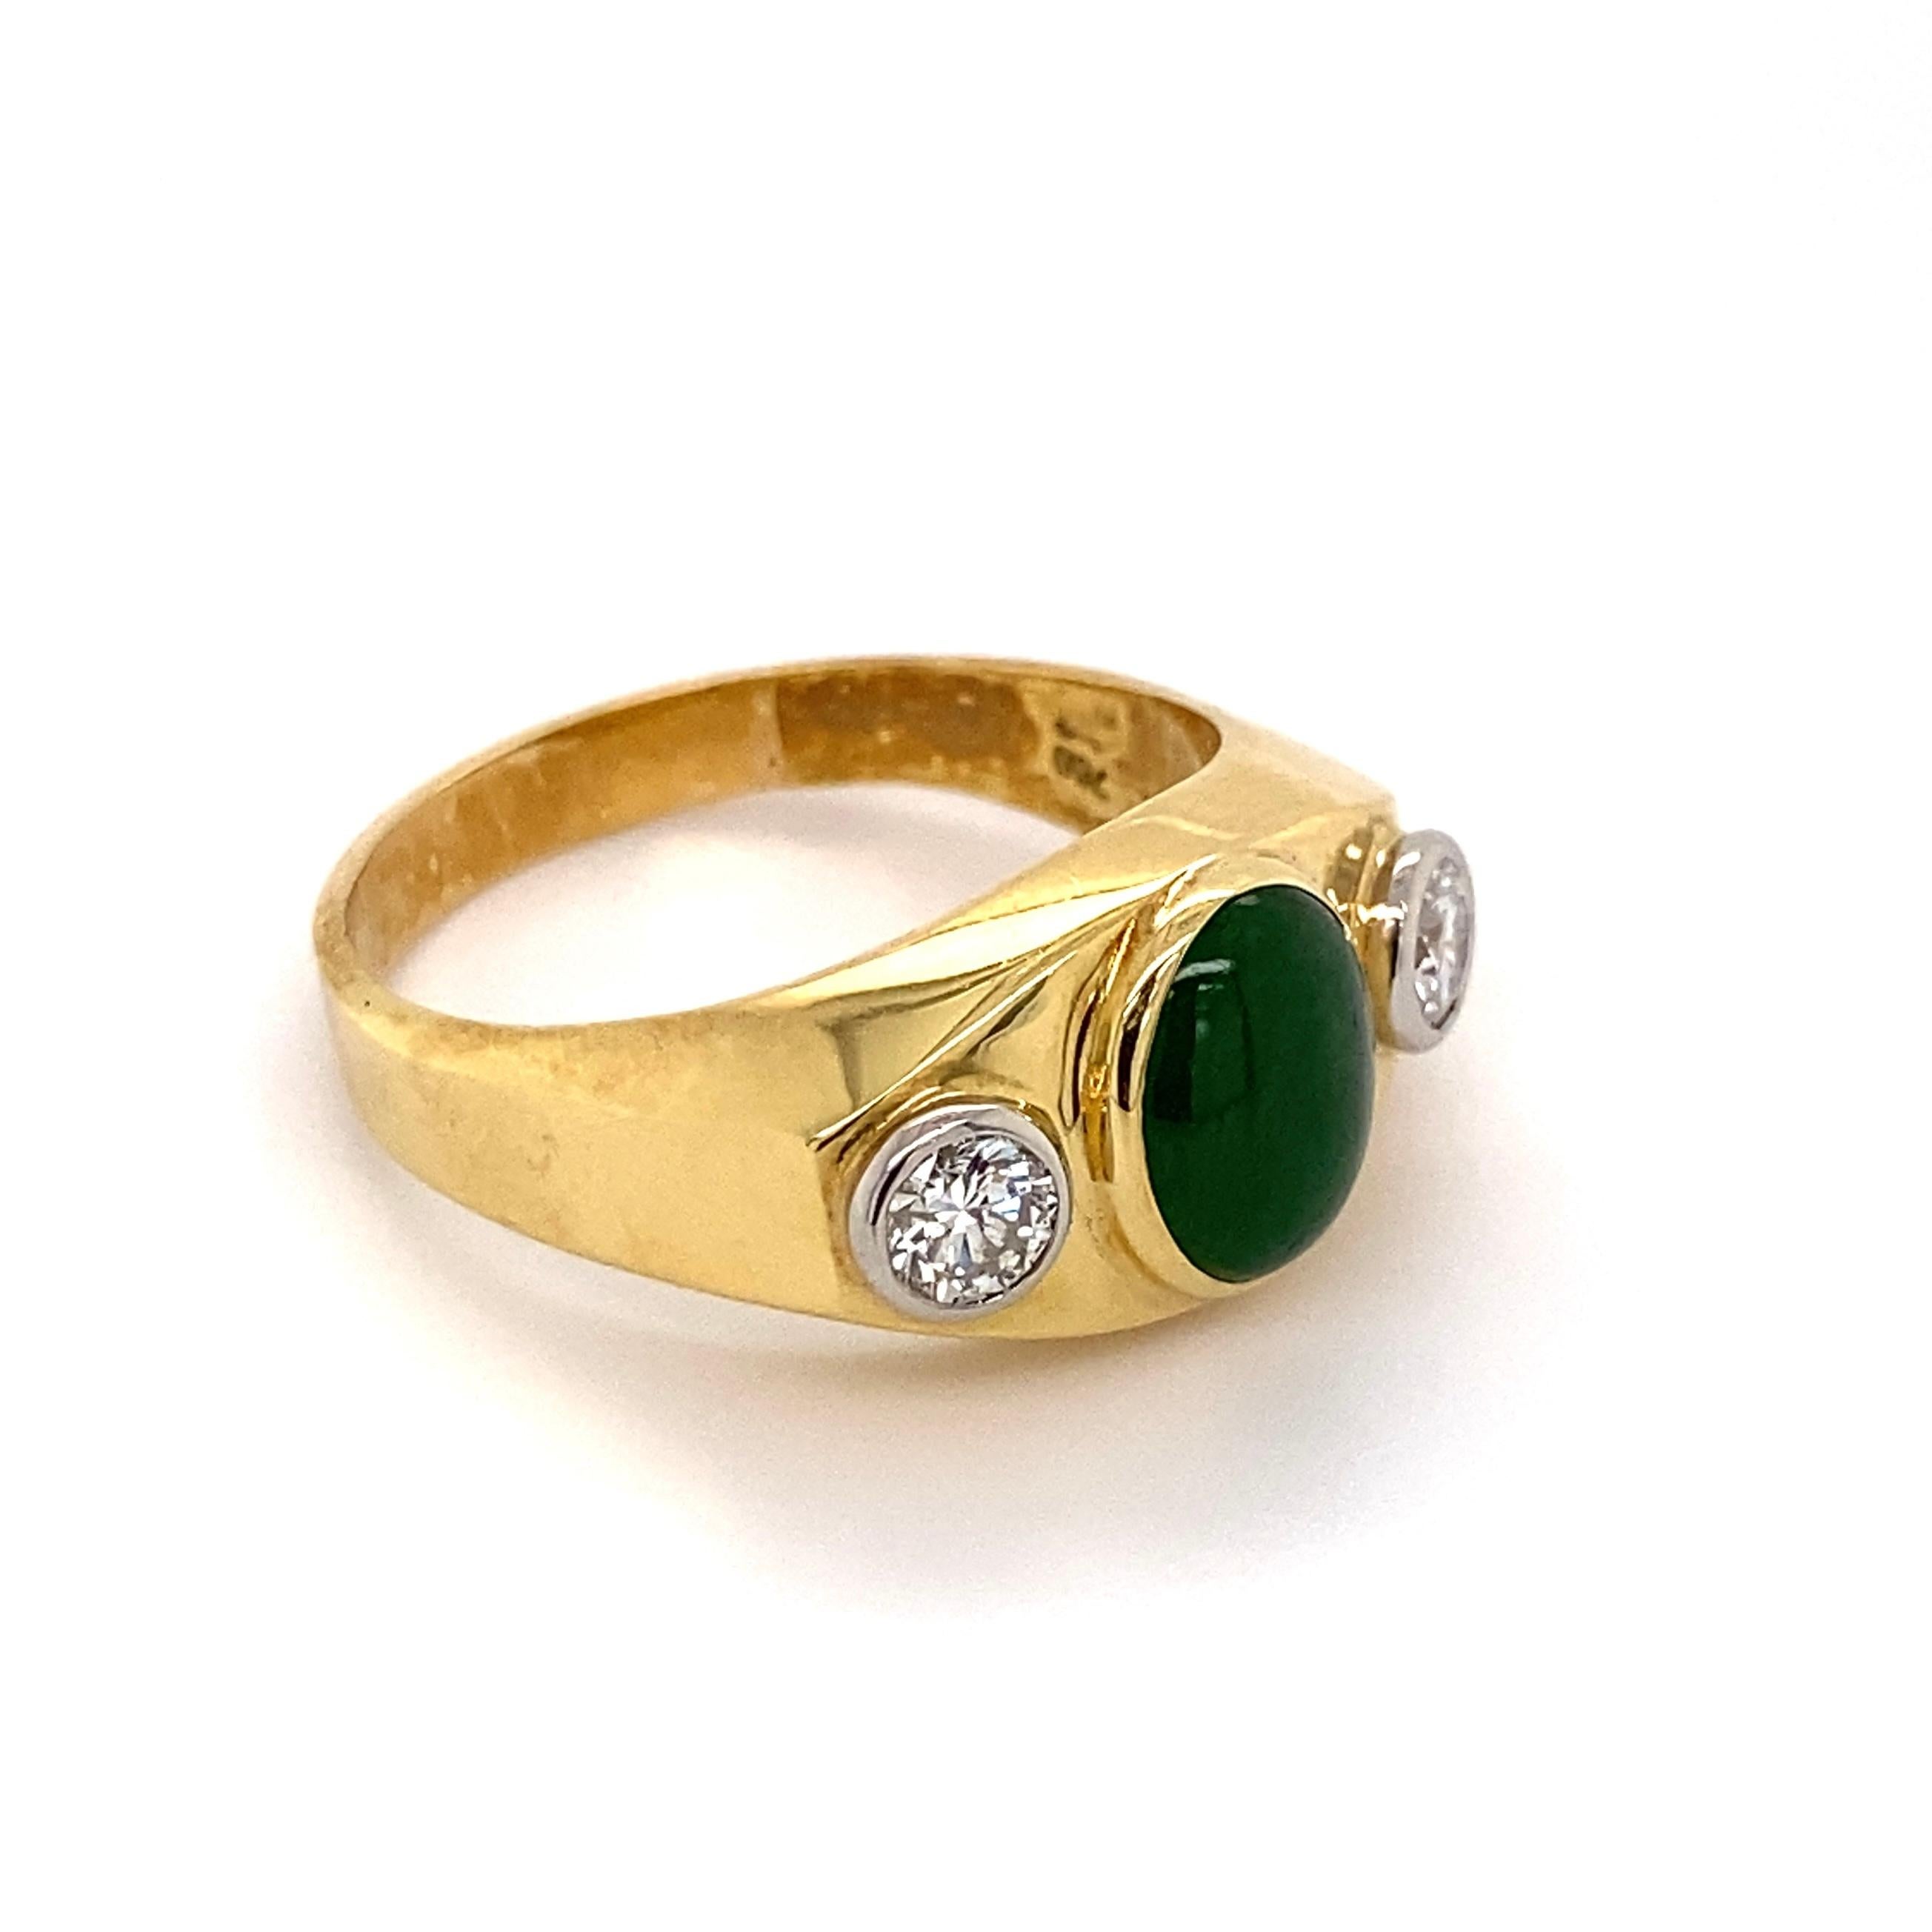 Handsome Gent’s Three-Stone Jade and Diamond Gold Signet Ring, centering a securely Hand set 1 Carat Jade, flanked by Diamonds, approx. 0.70tcw, set in 18K White Gold Bezel settings. Hand crafted High Quality 2-tone 18 Karat Yellow and White Gold